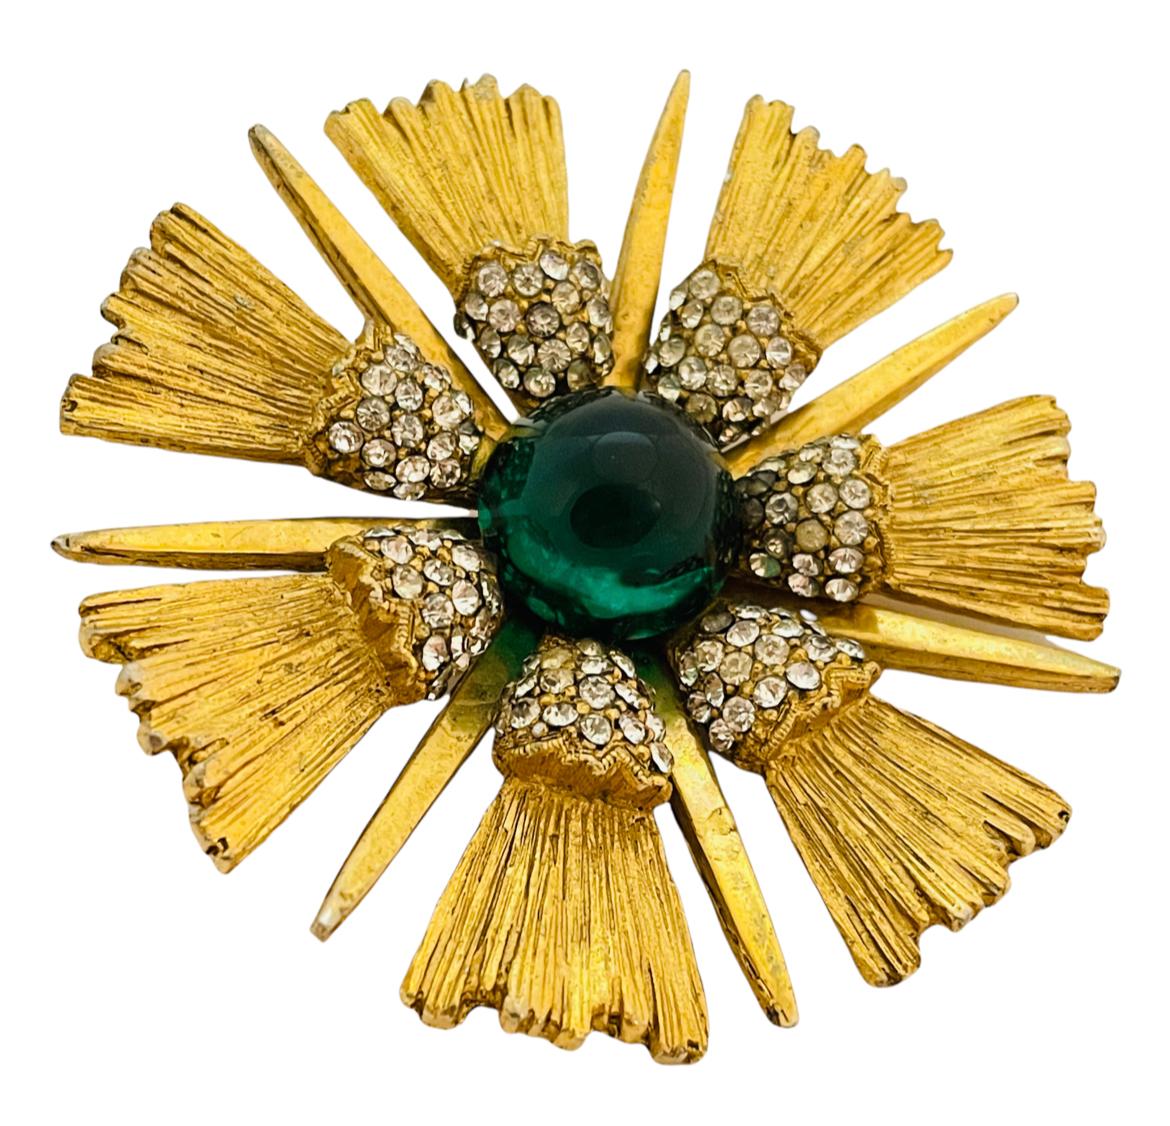 DETAILS
signed HATTIE CARNEGIE
gold tone clear rhinestones and green glass cabochon
vintage designer pin brooch 
collectors piece

MEASUREMENTS  
2 1/4